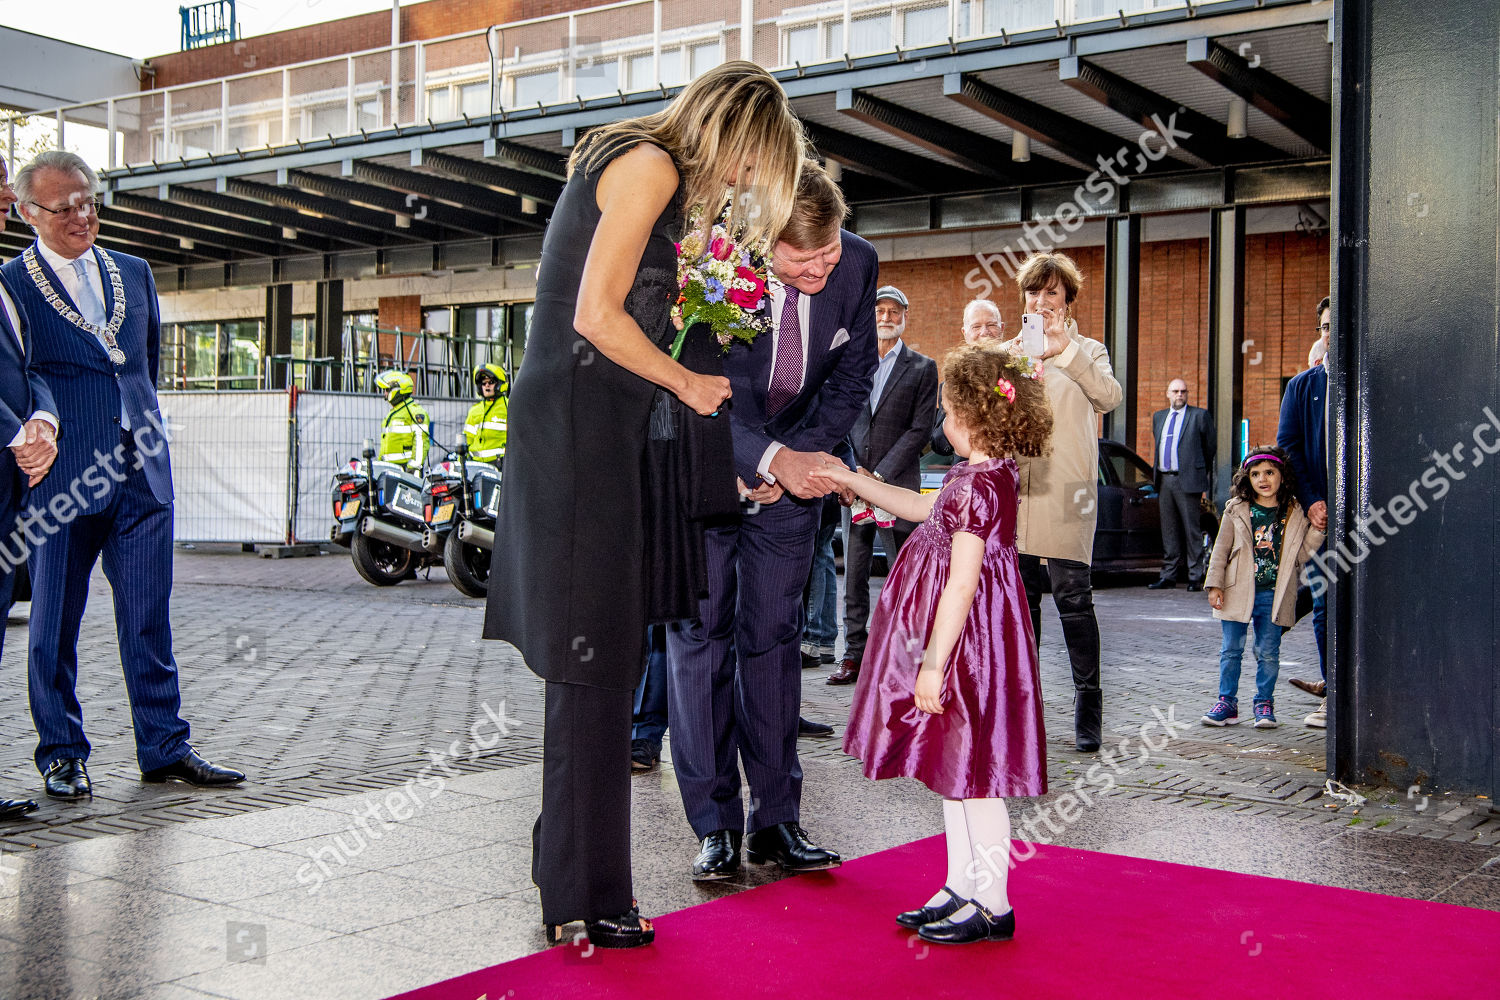 king-willem-alexander-and-queen-maxima-of-the-netherlands-attend-the-premiere-of-gurre-lieder-amsterdam-the-netherlands-shutterstock-editorial-9636541ad.jpg